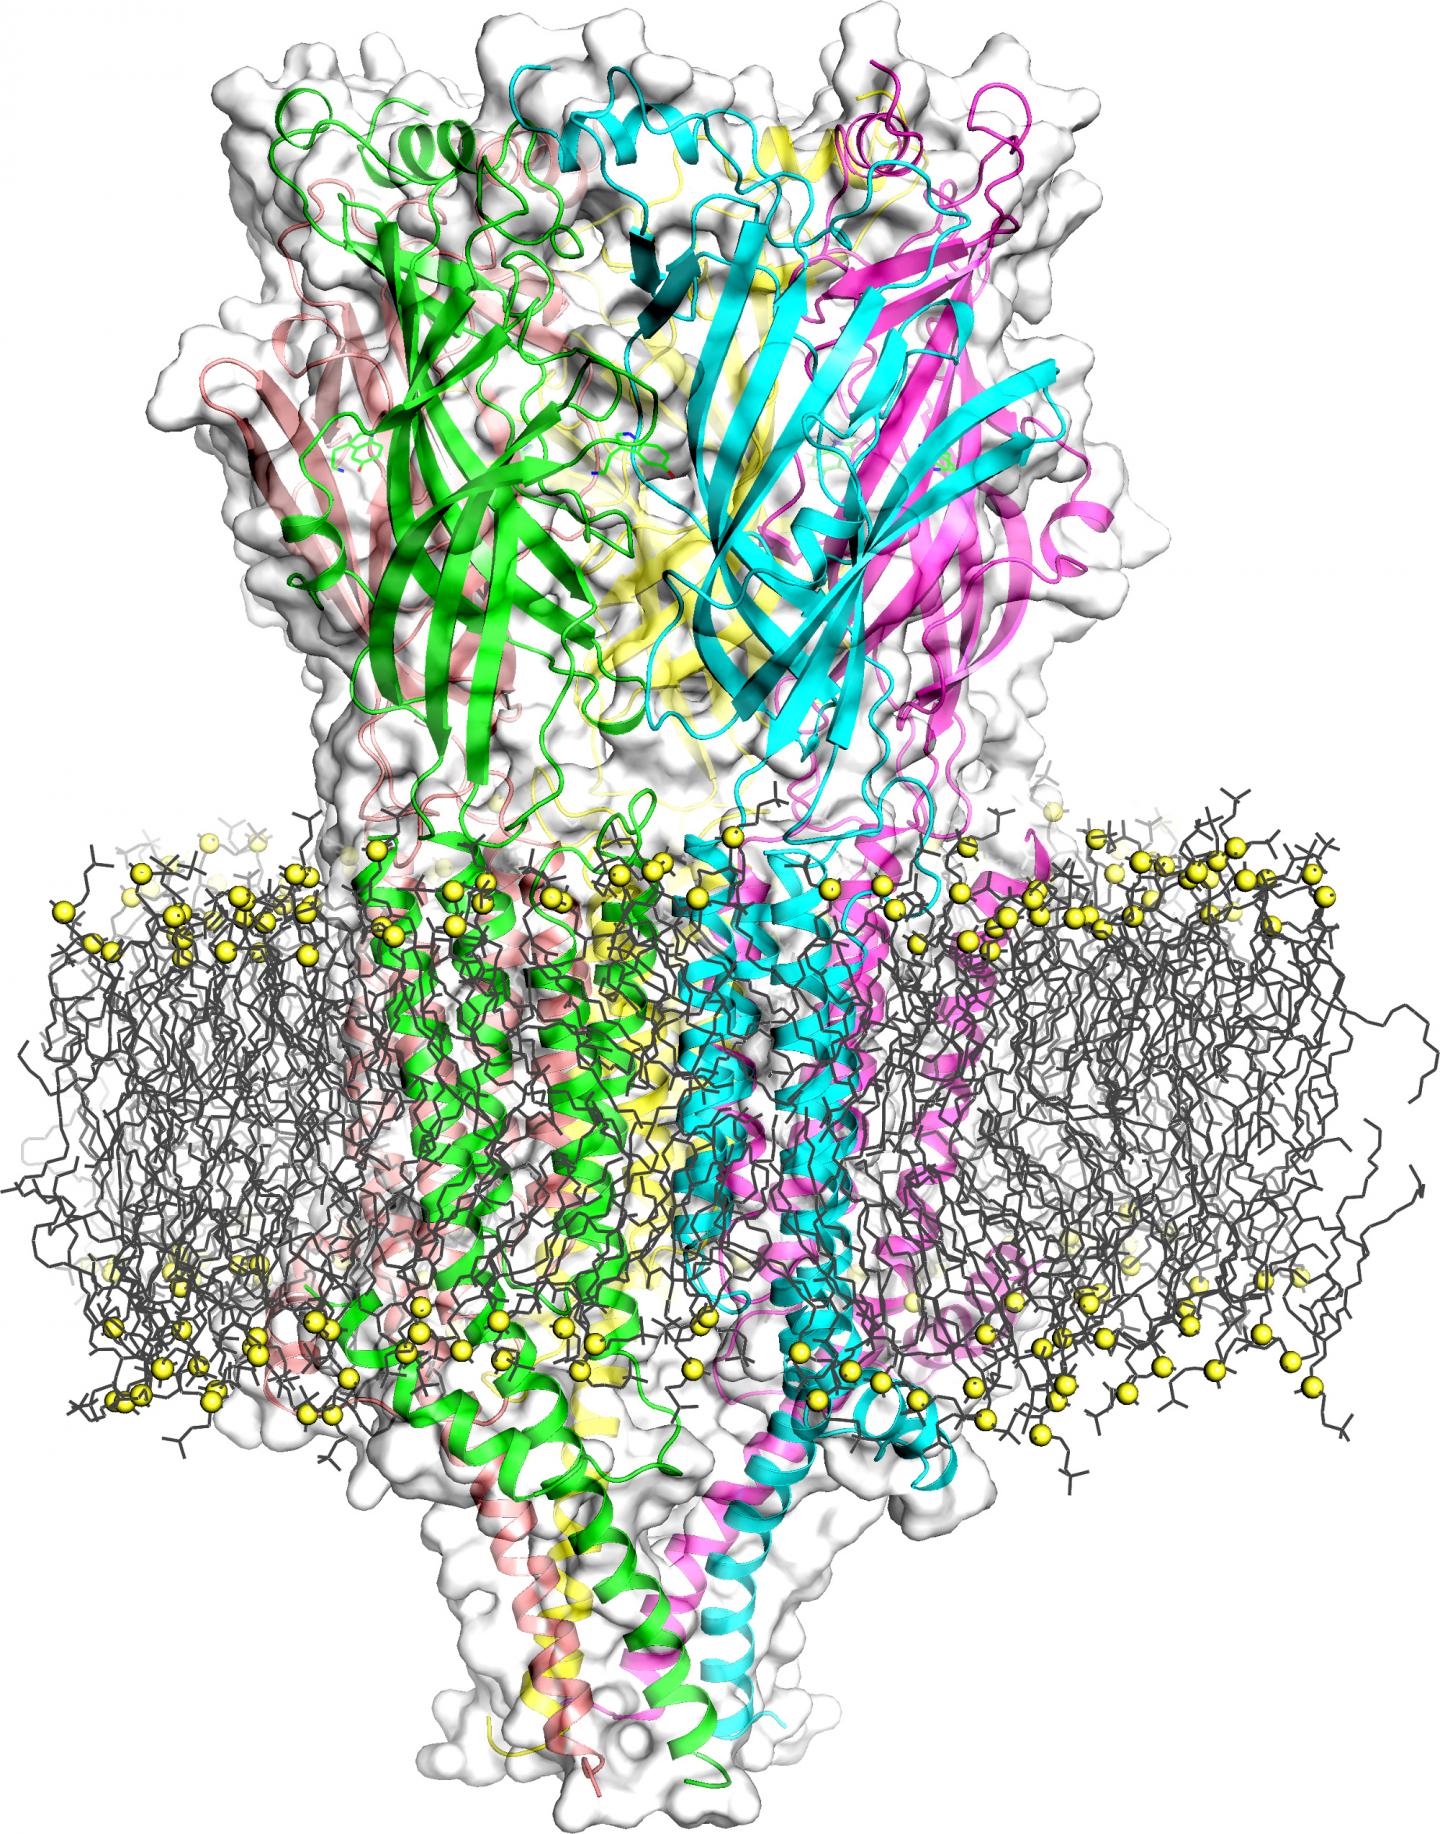 3-D Structure of 5-HT3 Receptor